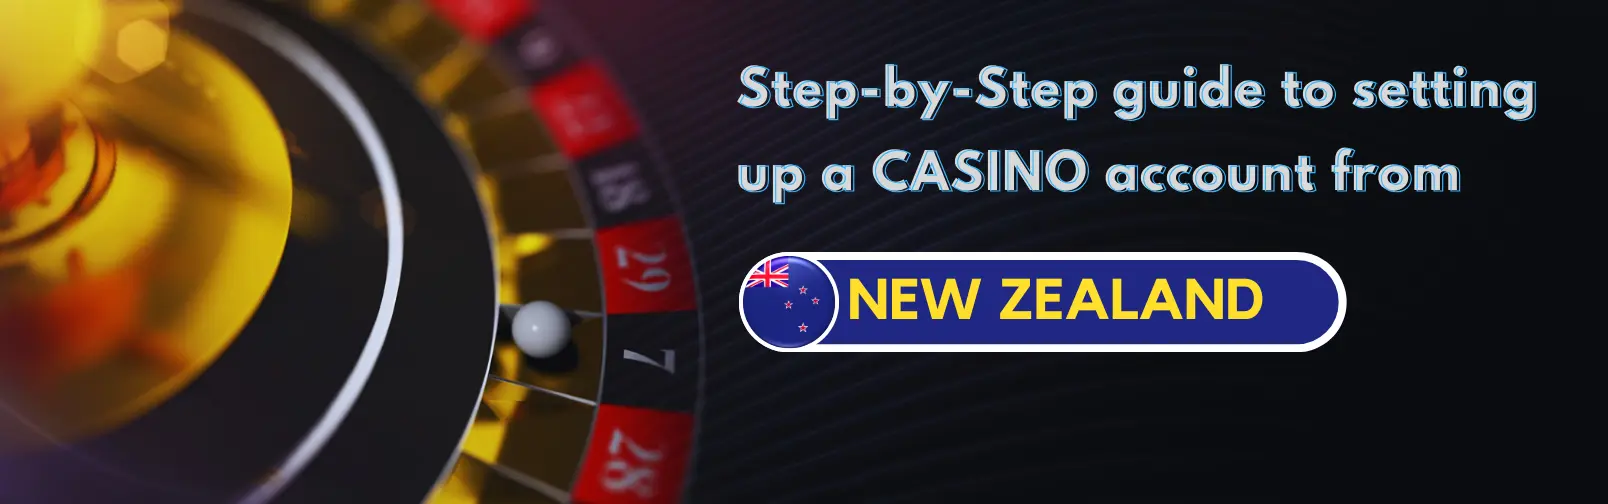 A Step-by-Step Guide to Setting Up a Casino Account from NZ